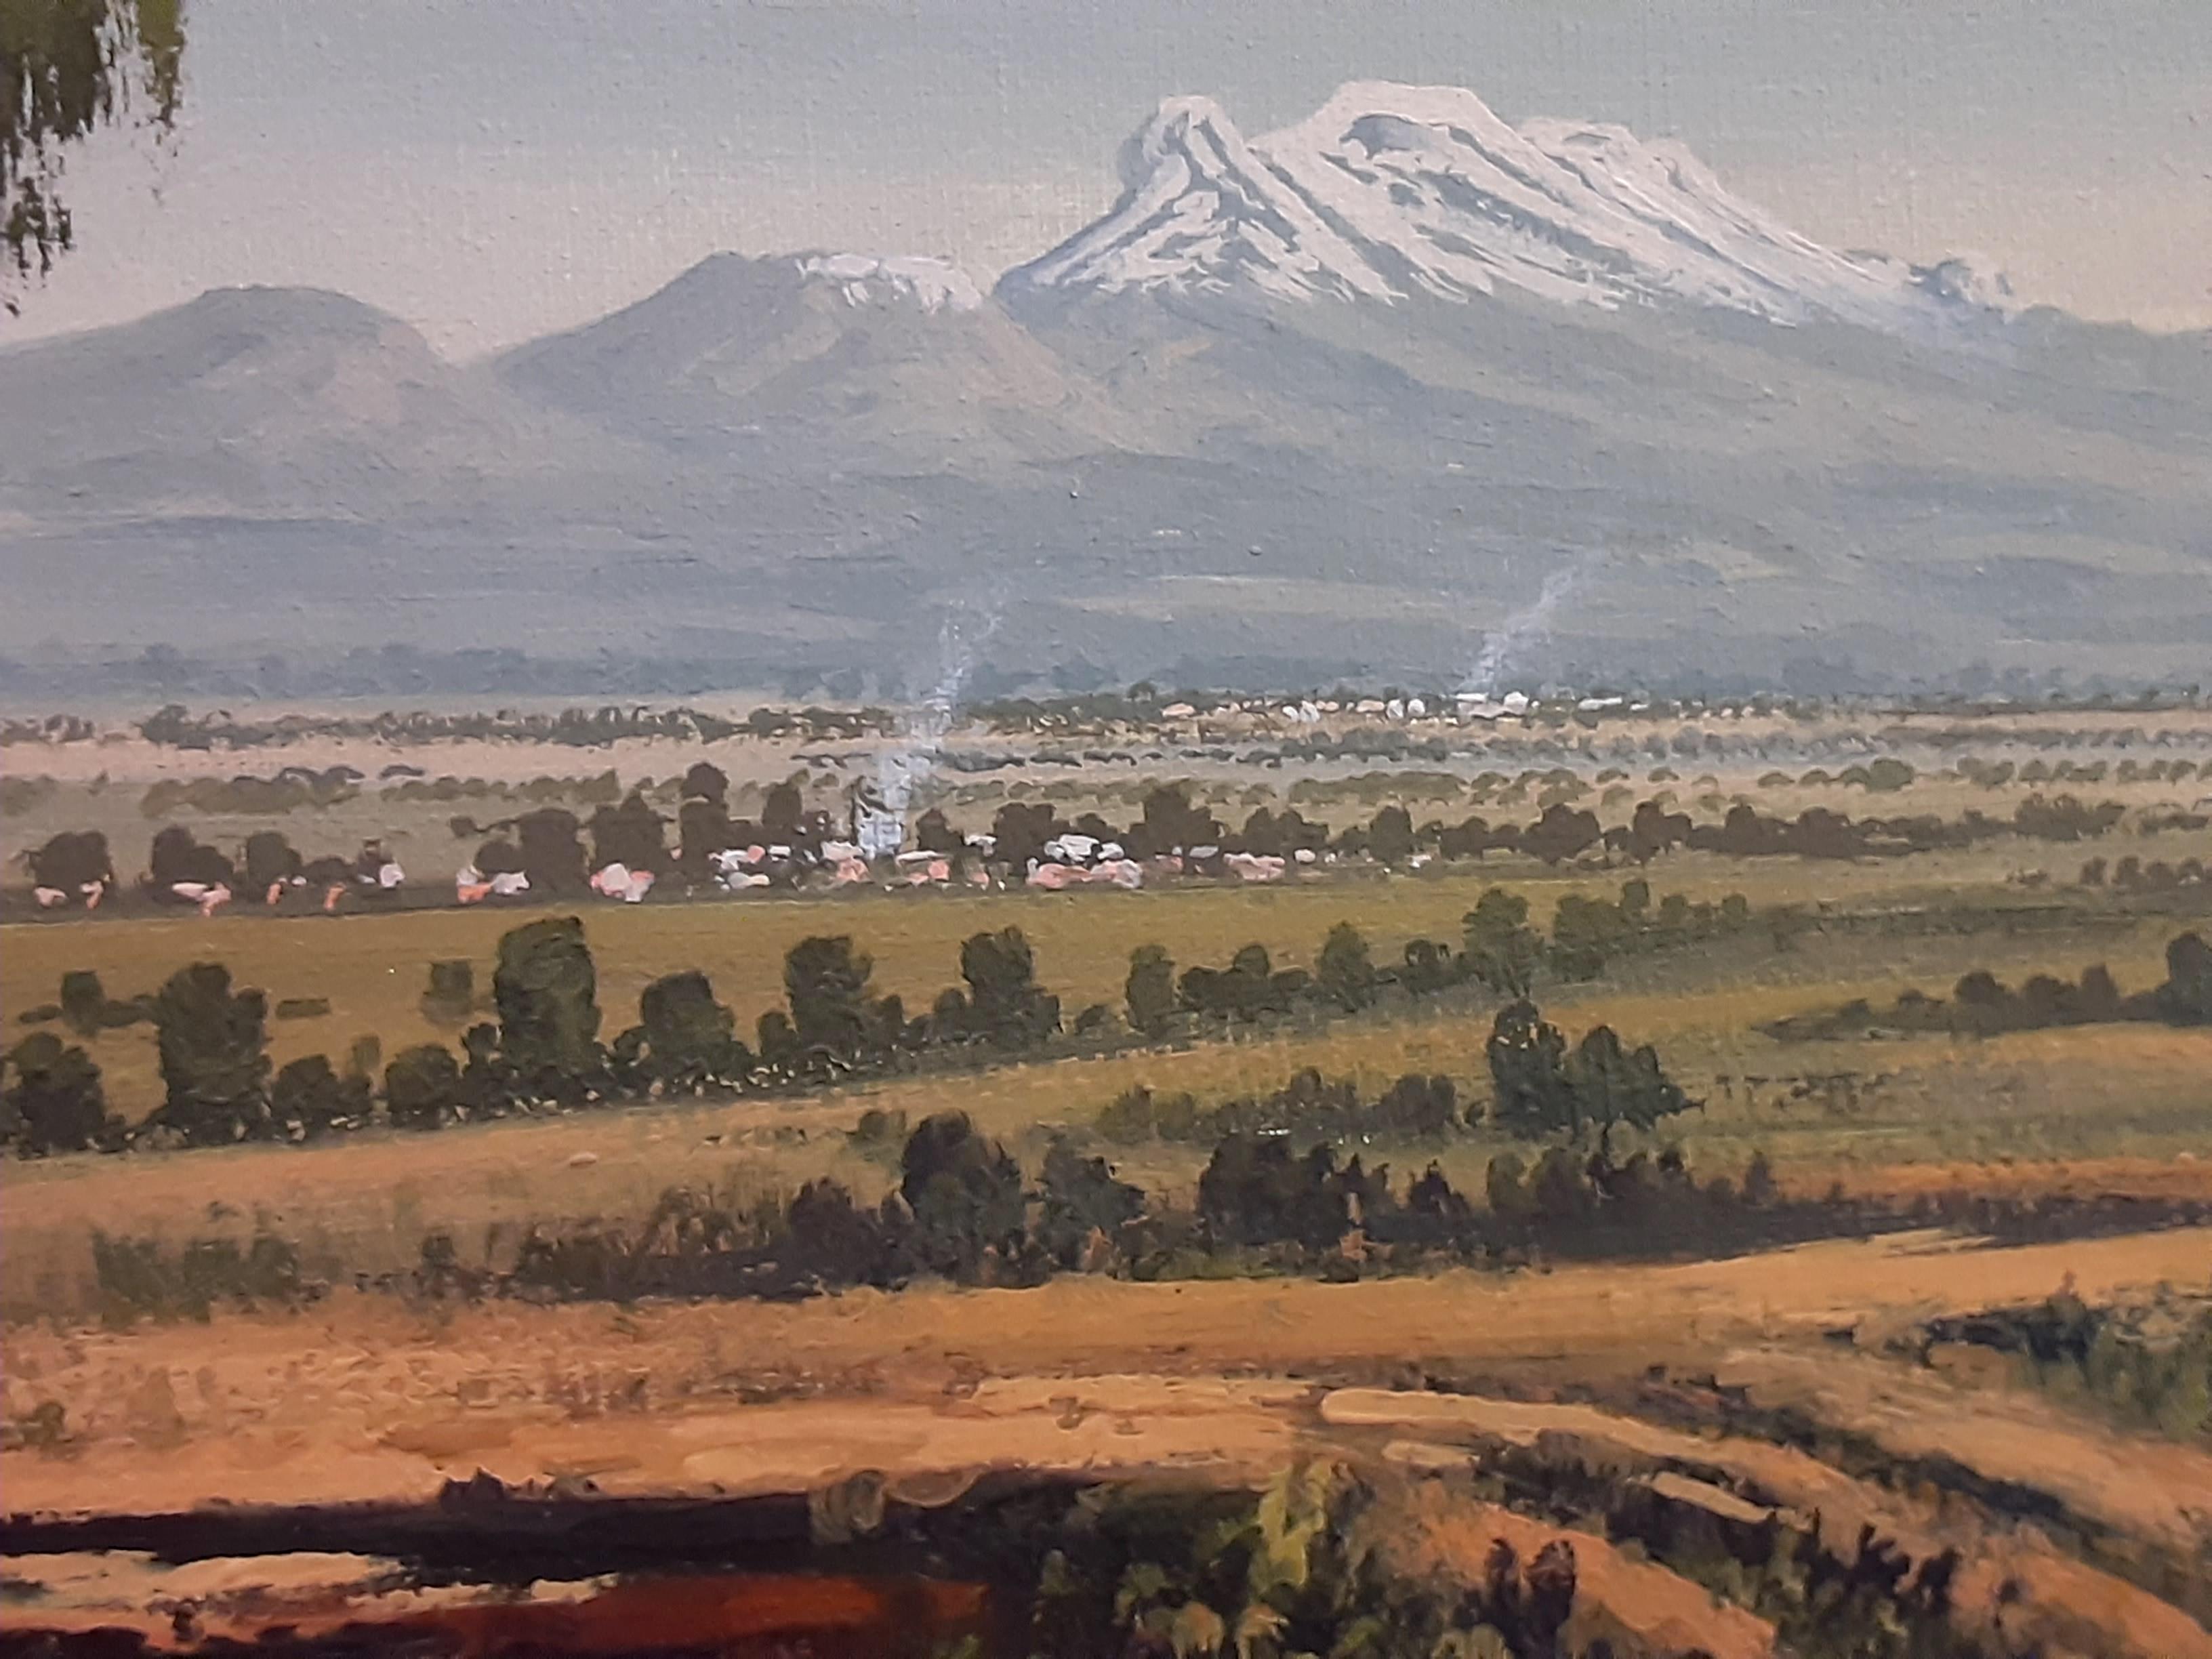 This landscape painting is of a volcano located southeast of Mexico City. This distant view of Popocatepetl gives it a sense of majesty. The cloudy blue sky sprawls over the top, gently balancing the snow-capped volcano. The foreground has a tree